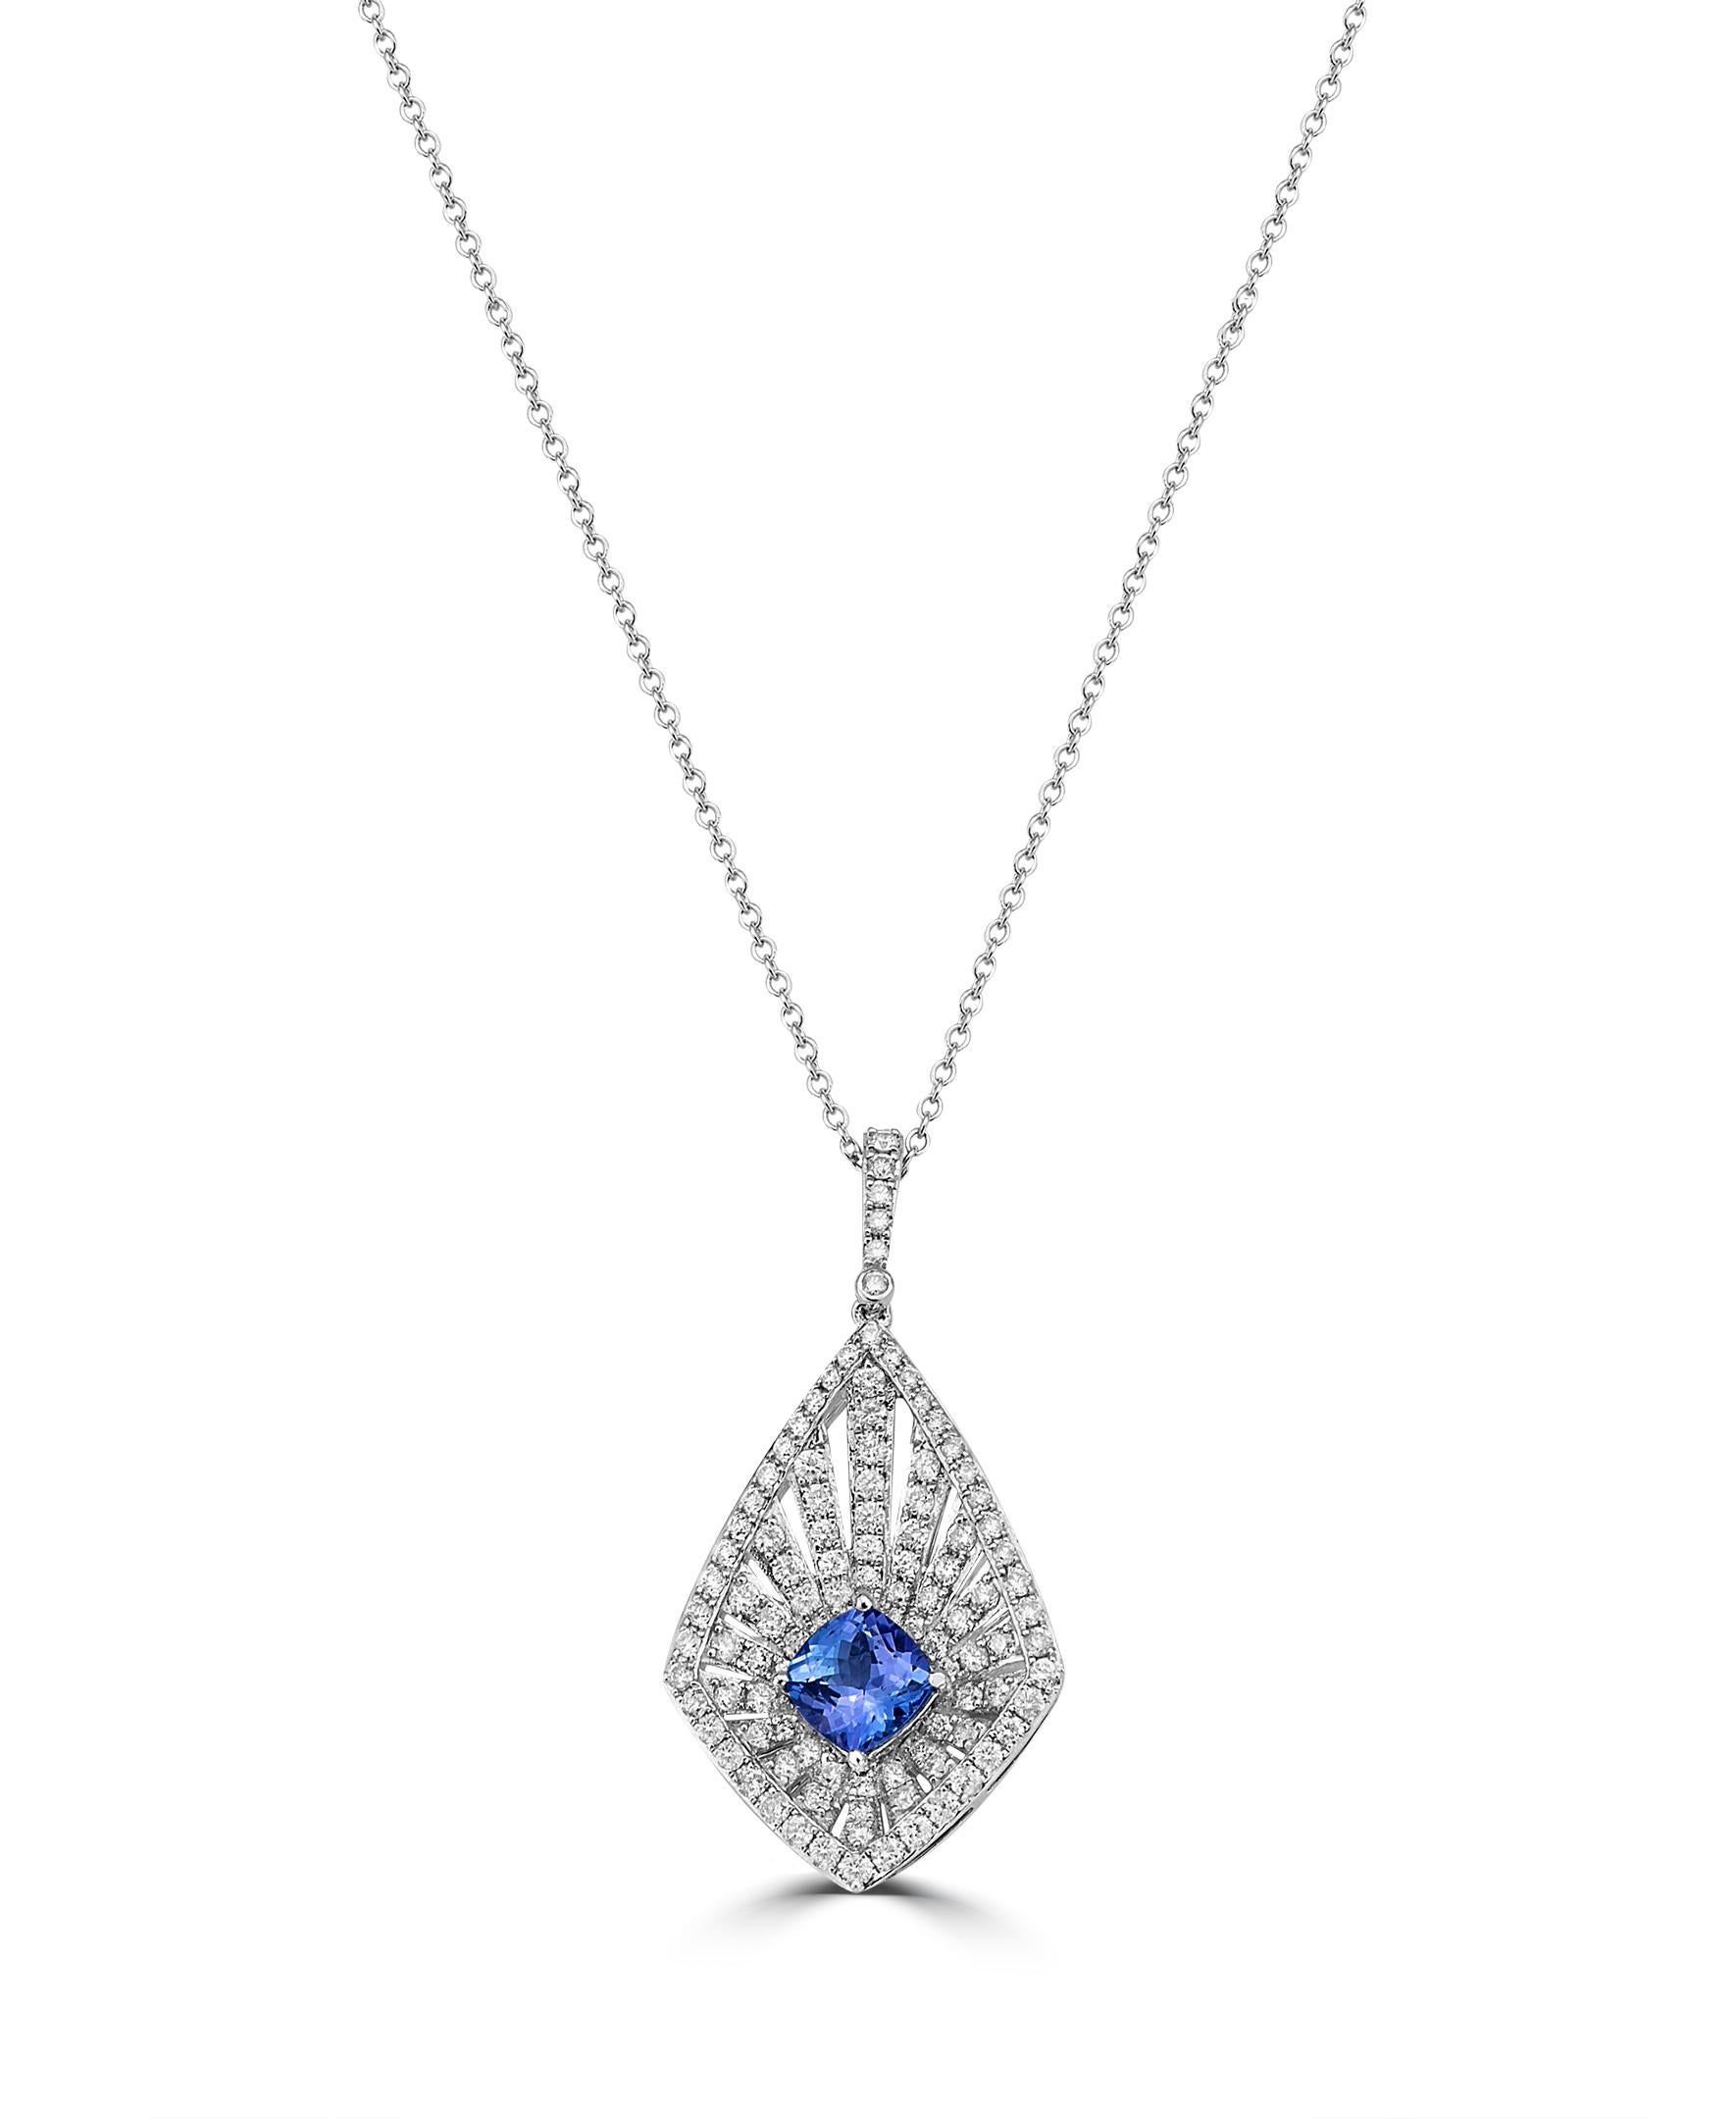 This Effy design features a cushion cut Tanzanite center stone surrounded by 107 round cut diamonds.

Total diamond weight is 0.99ct.

Total tanzanite weight is 0.95ct.

Item number V387.

